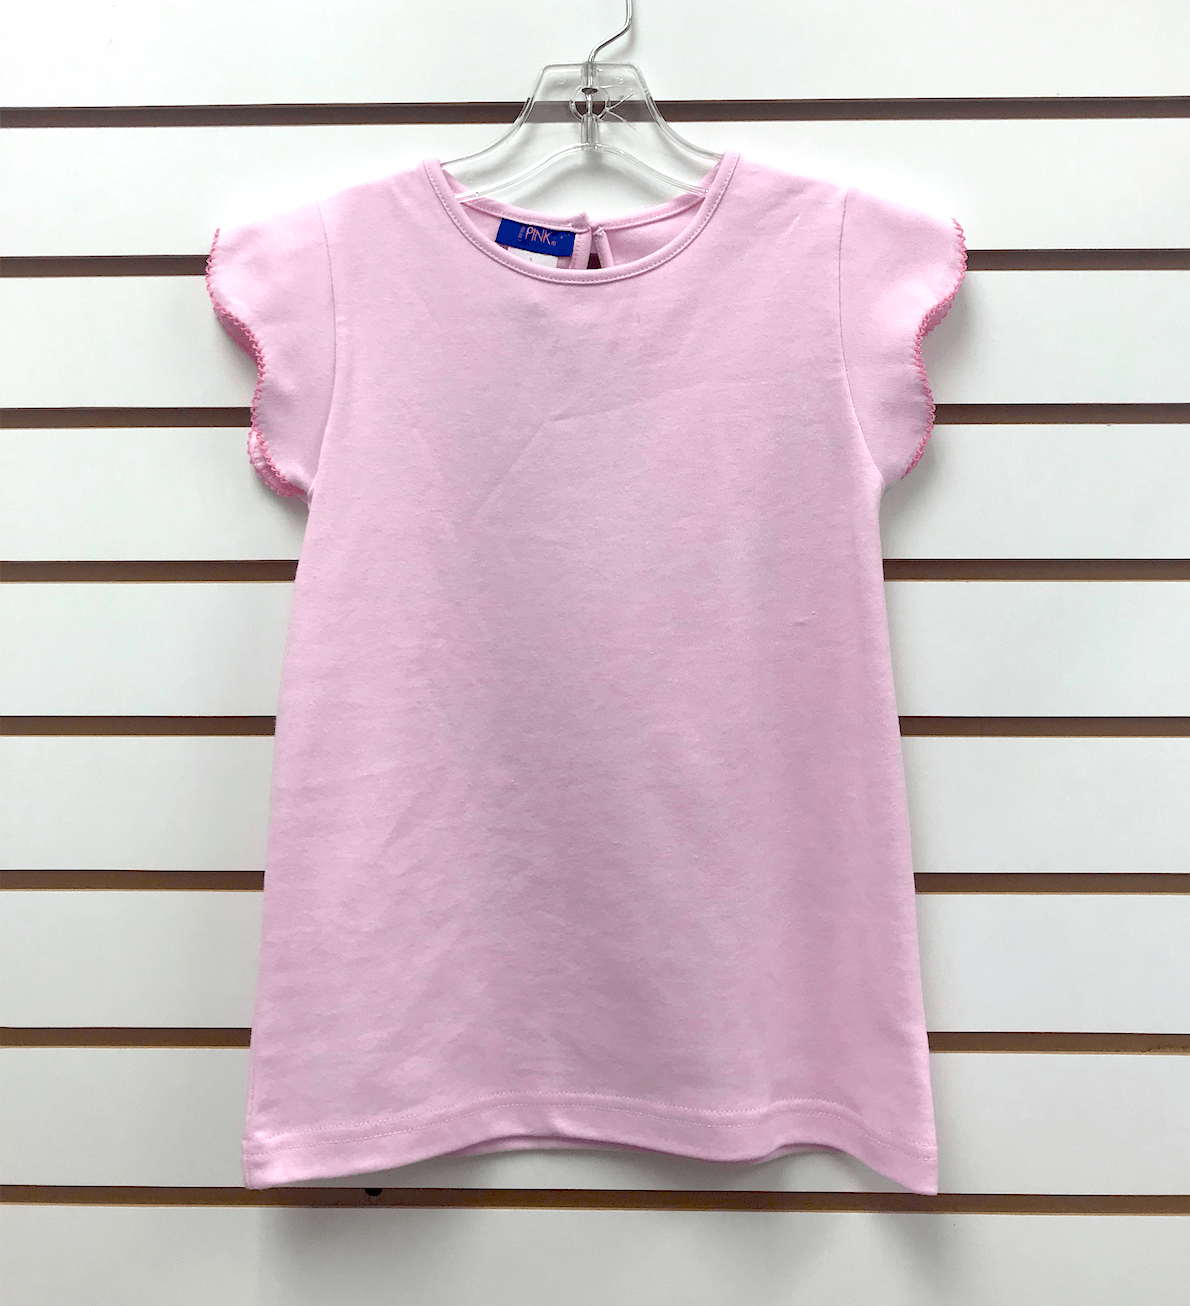 Vive La Fete - Vive La Fete Pink Knit Top with Scalloped Sleeves - Little Miss Muffin Children & Home